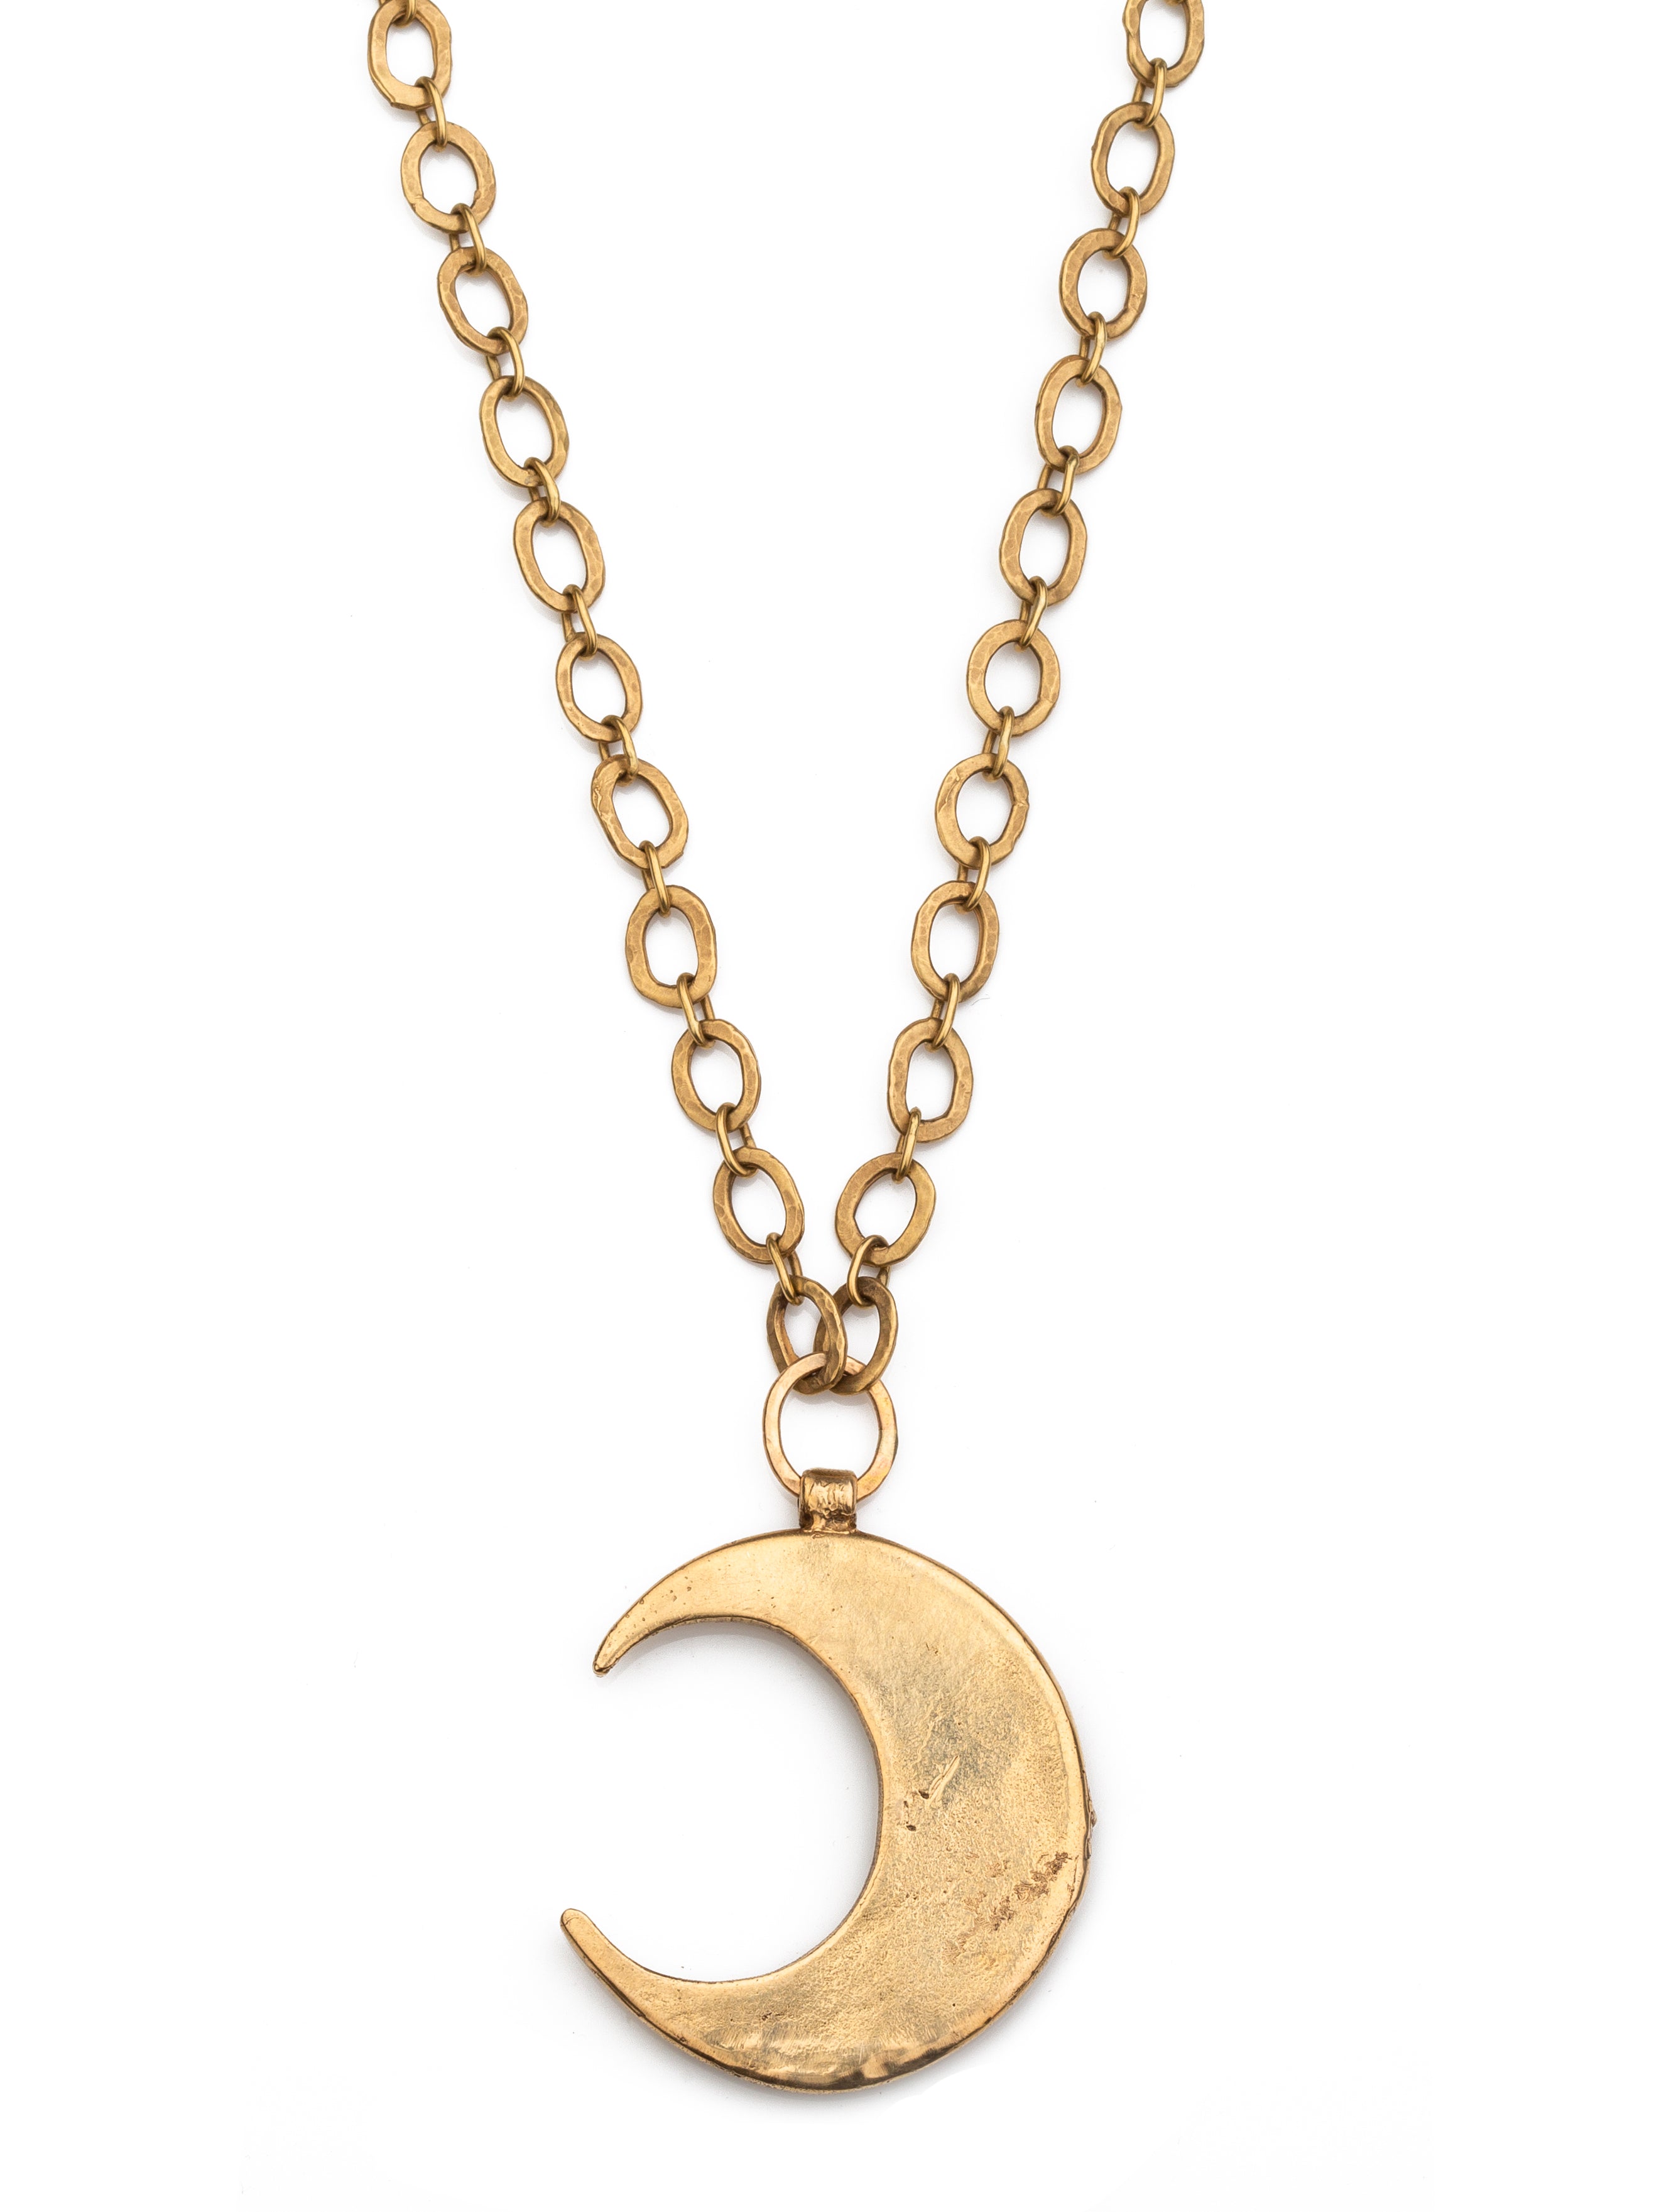 Crescent Moon Necklace, Gold Moon Necklace, Moon Necklace, Half Moon, Moon  Pendant, Simple Necklace, Dainty Necklace, Necklaces for Women - Etsy | Moon  necklace, Gold moon necklace, Star necklace